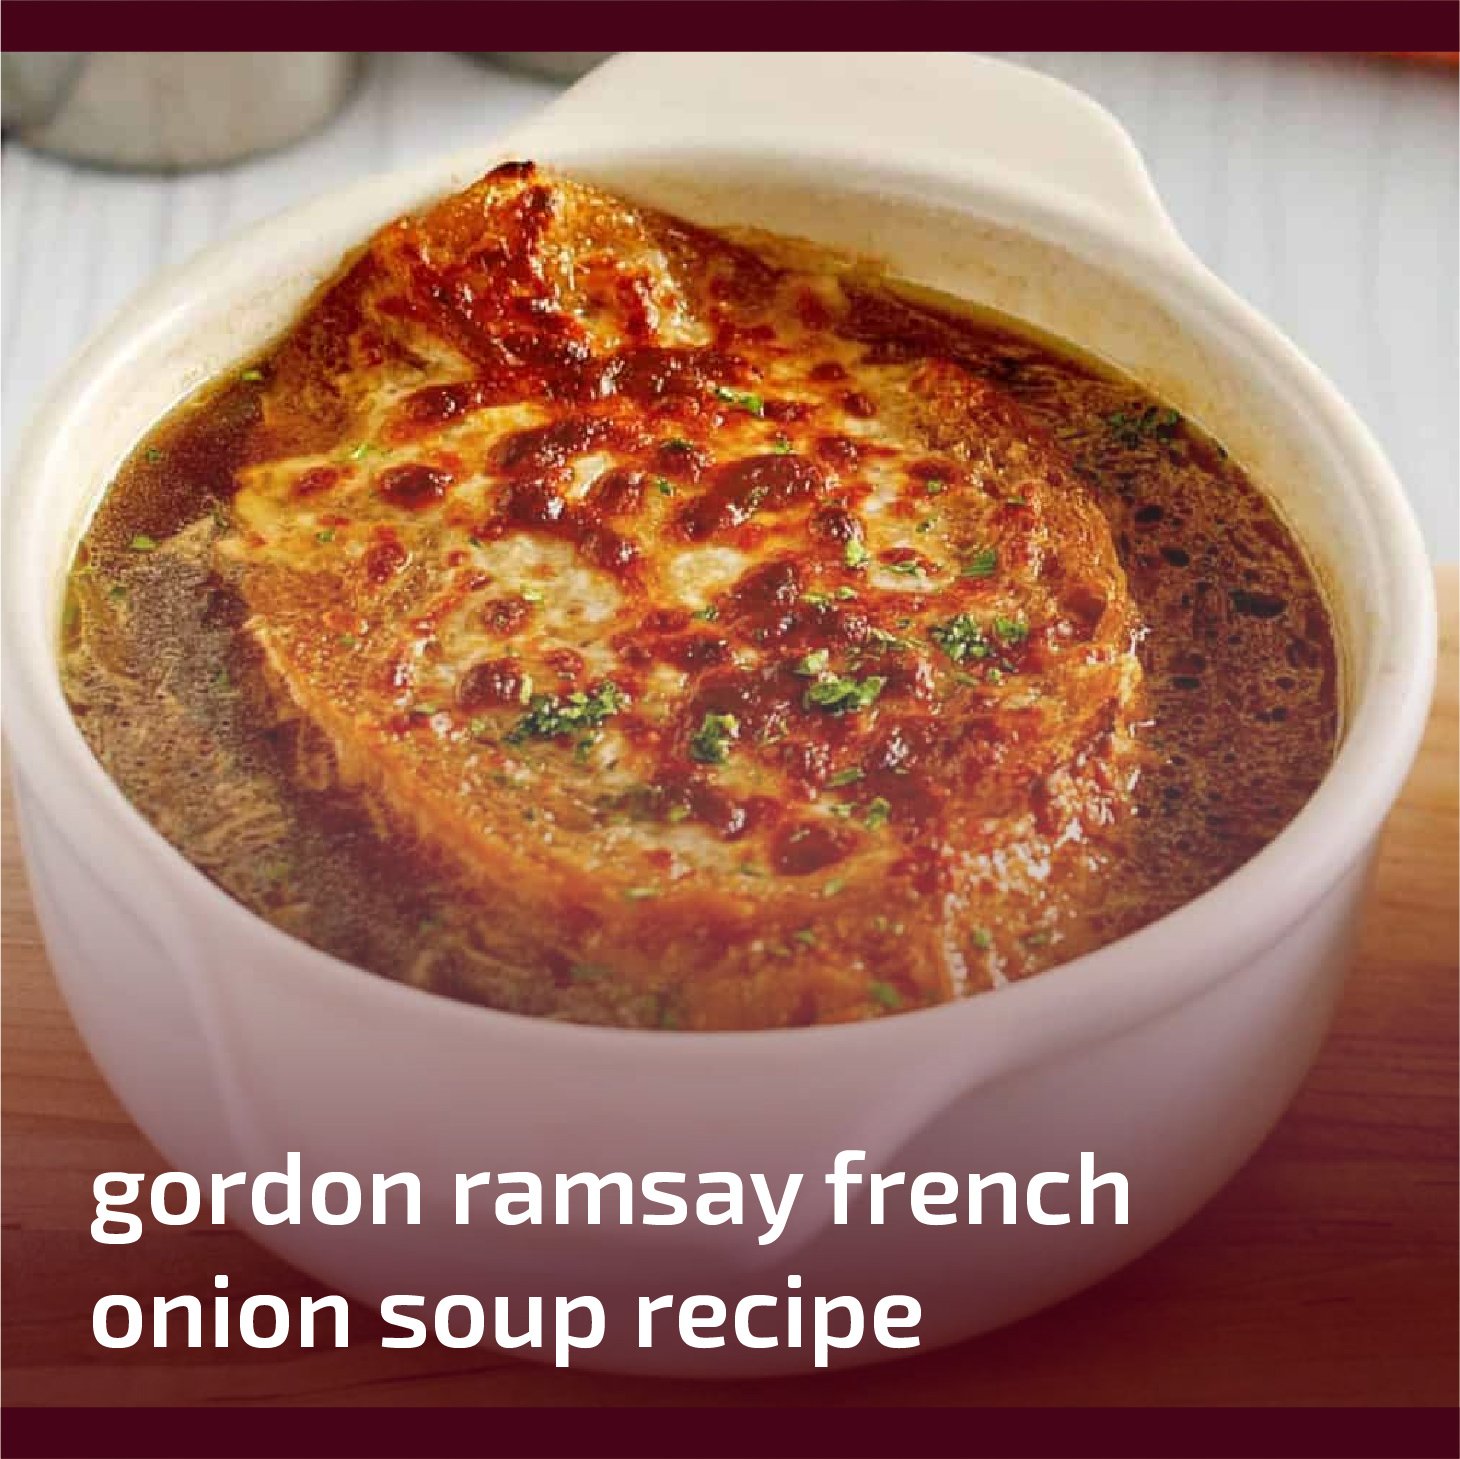 Make Gordon Ramsay's French Onion Soup Recipe At Home: A Step-By-Step Guide